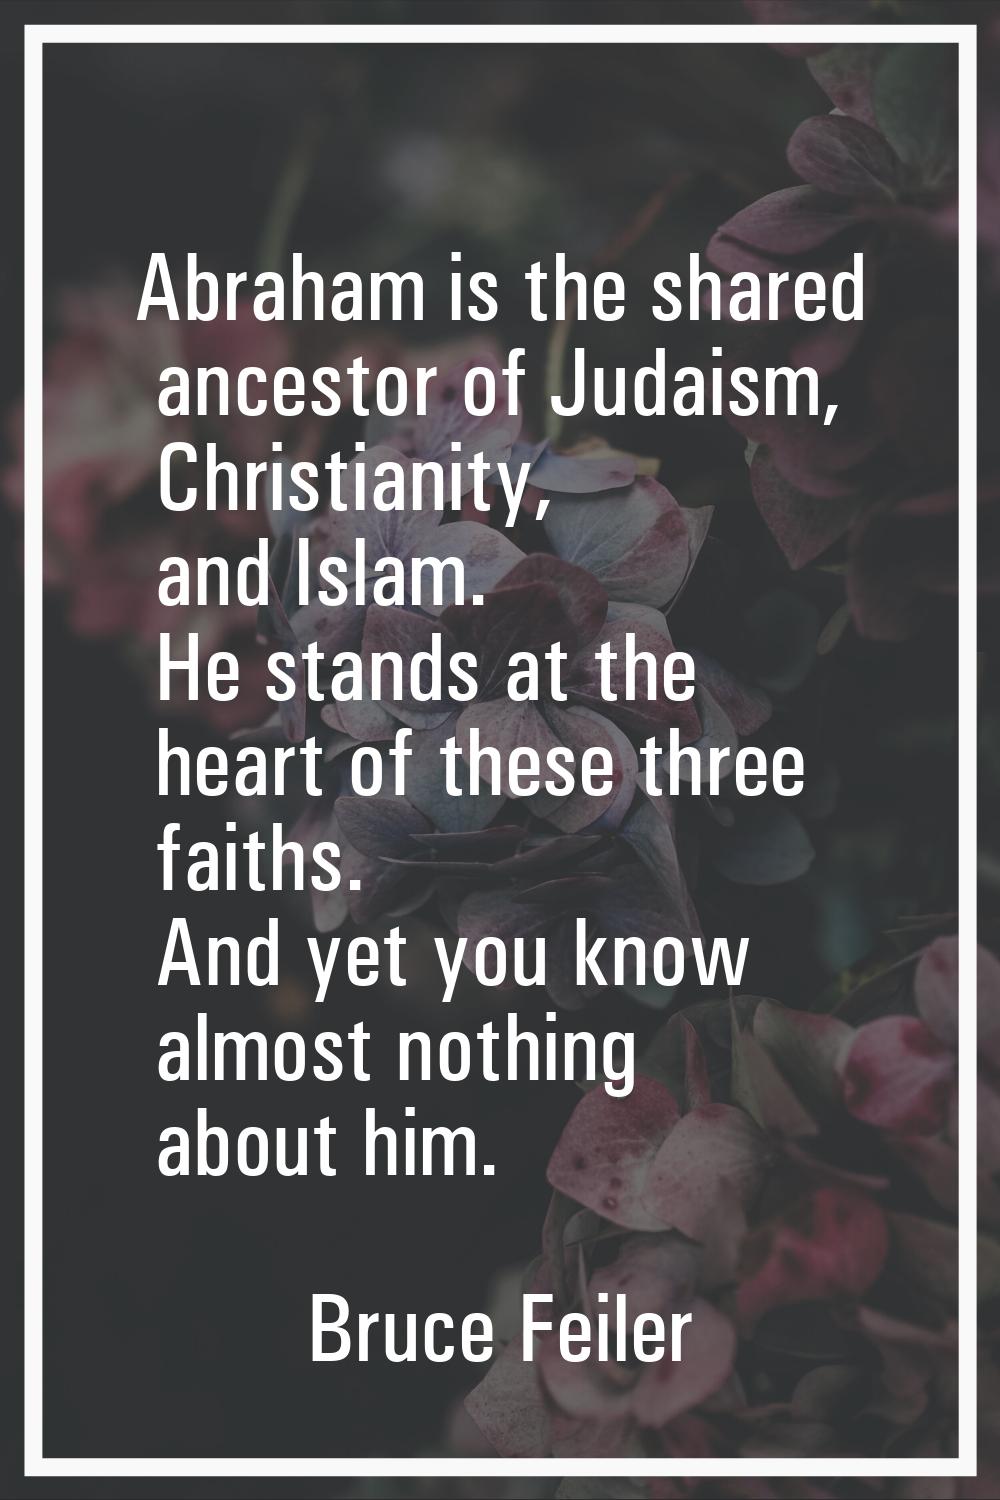 Abraham is the shared ancestor of Judaism, Christianity, and Islam. He stands at the heart of these